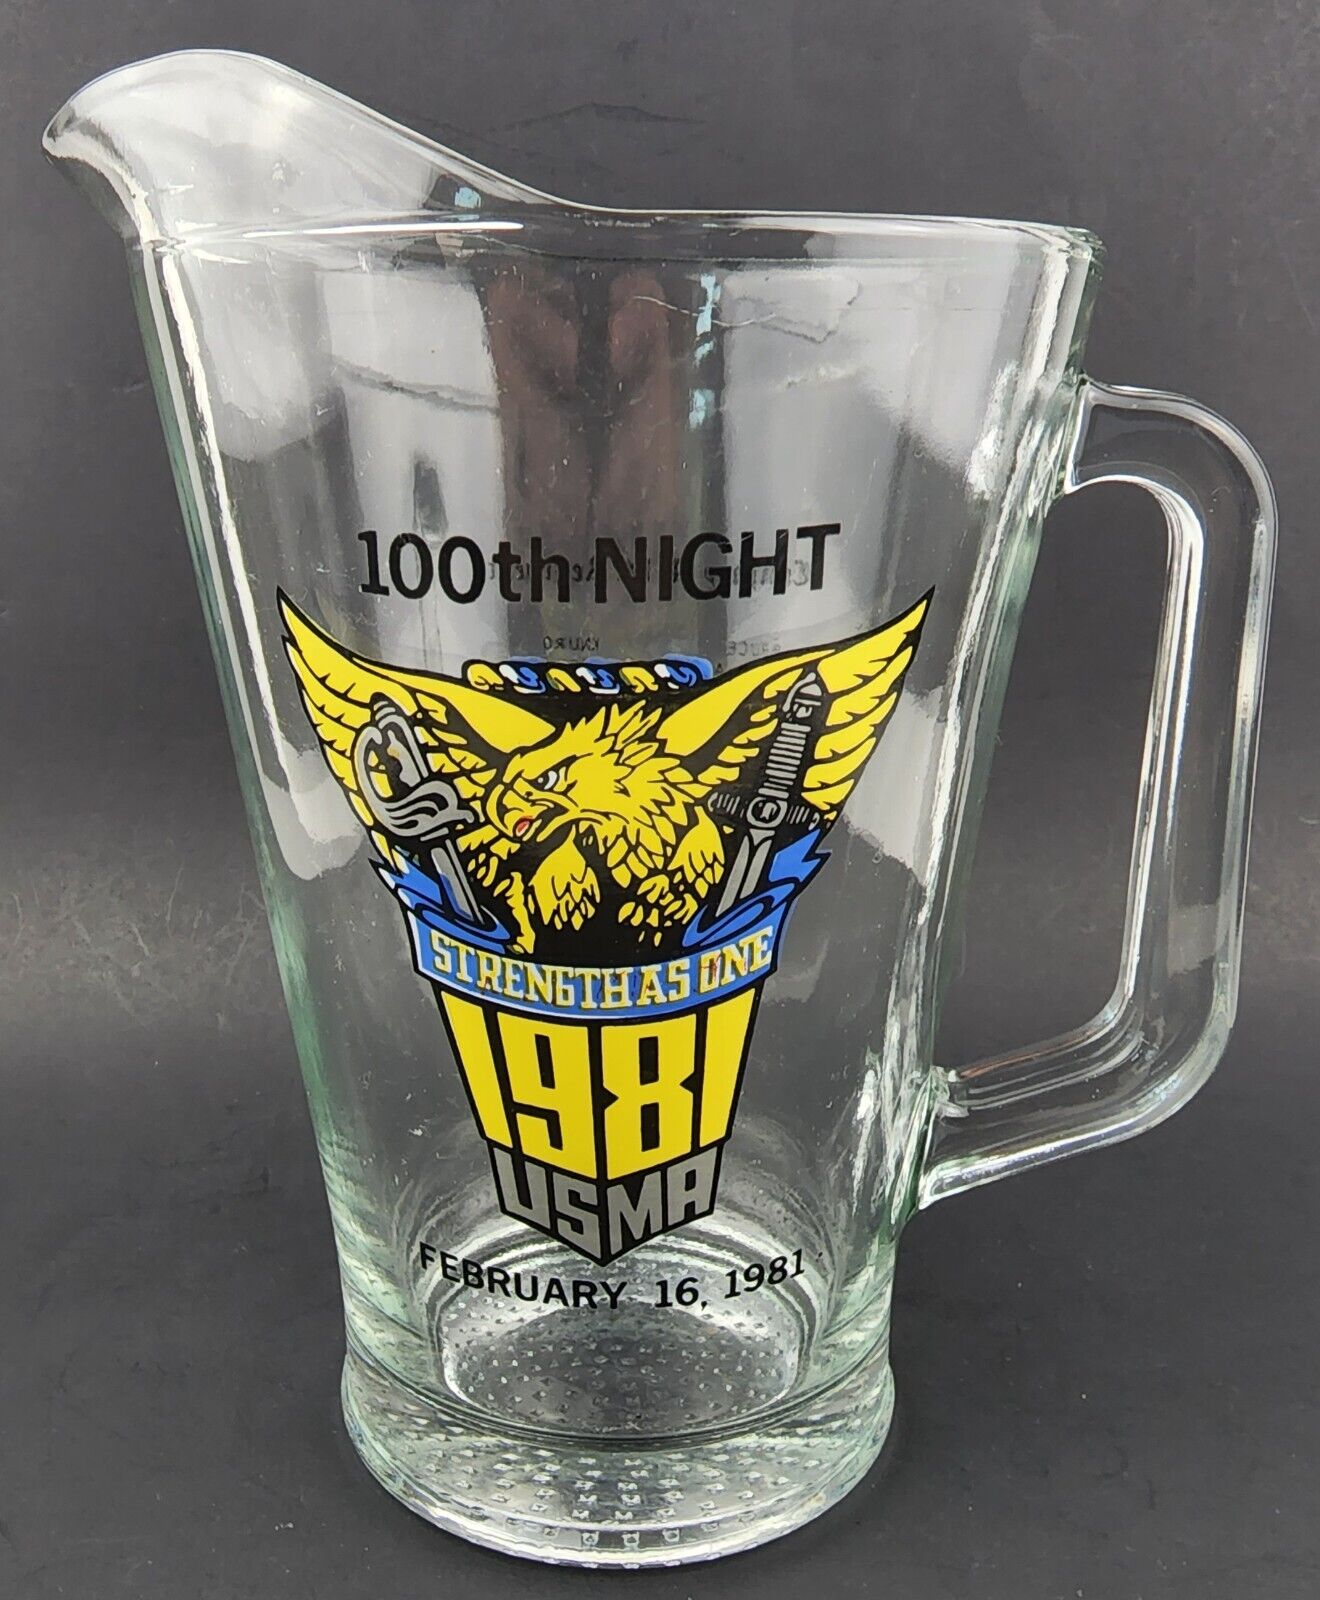 USMA Army West Point 100th Night Weekend Pitcher Feb. 16 1981 Co. A 1st Regiment